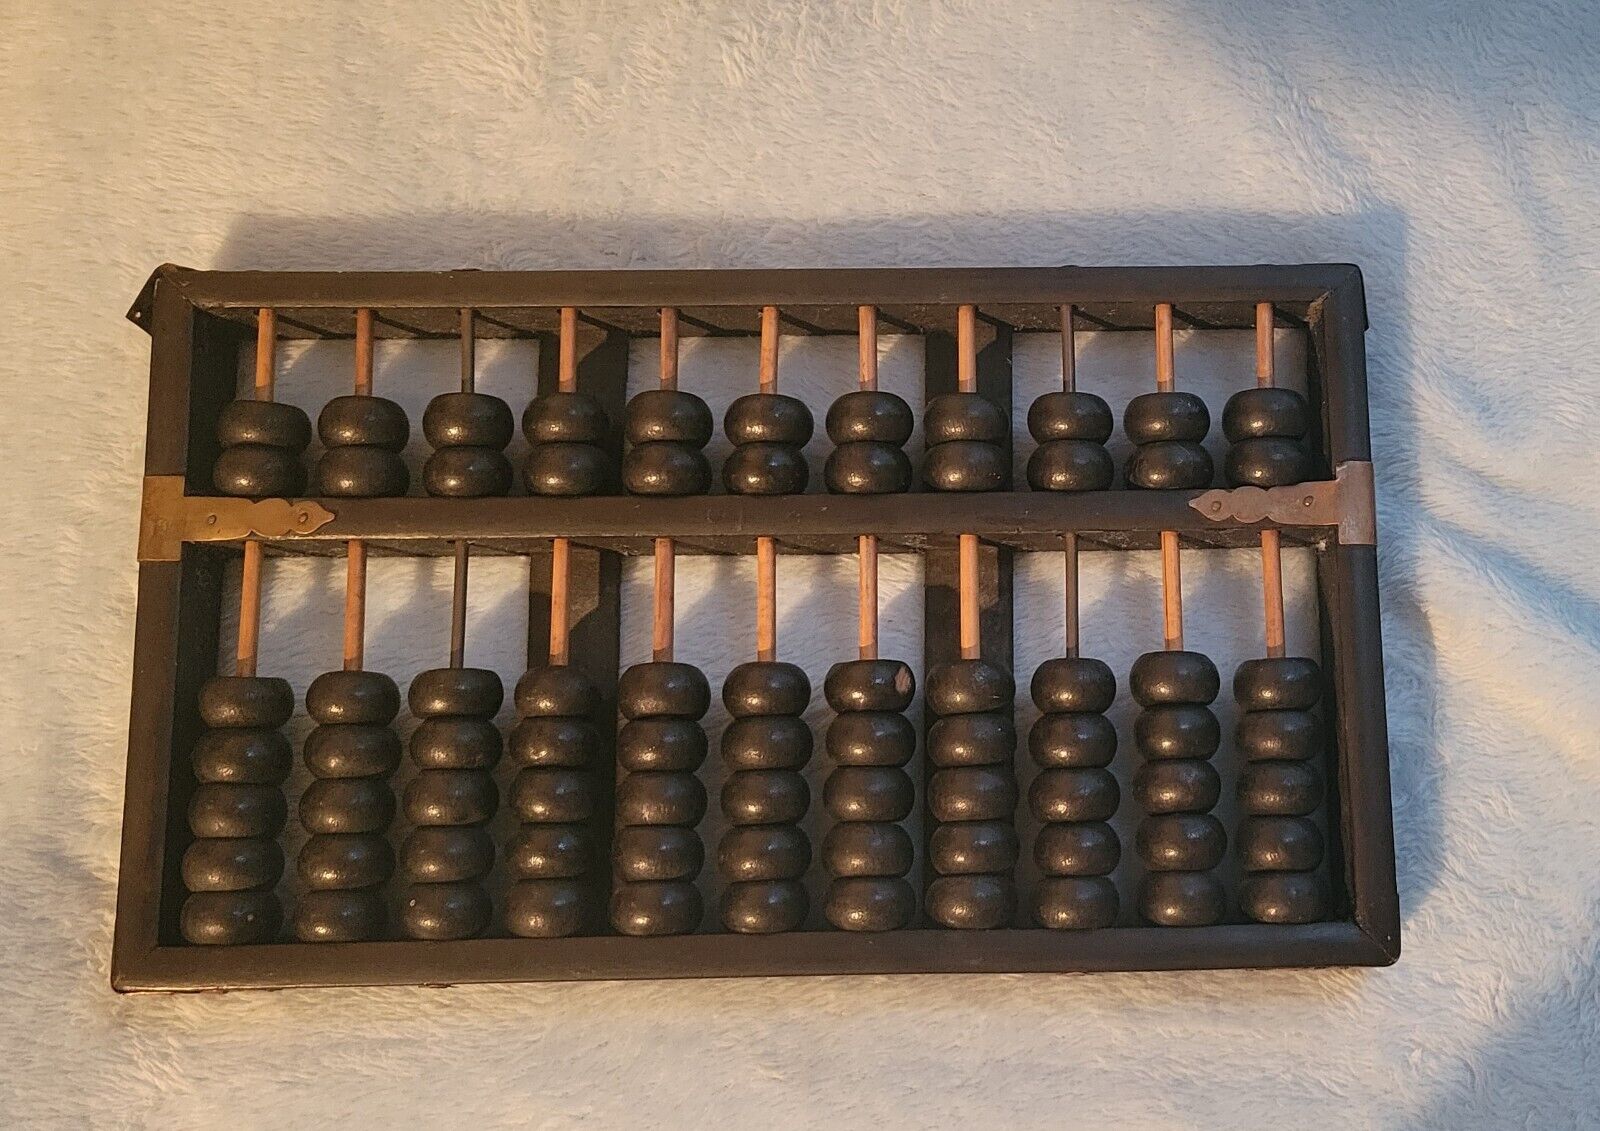 Vintage Chinese Lotus Flower Brand Abacus 11 Rods 77 Beads Brass Hardware